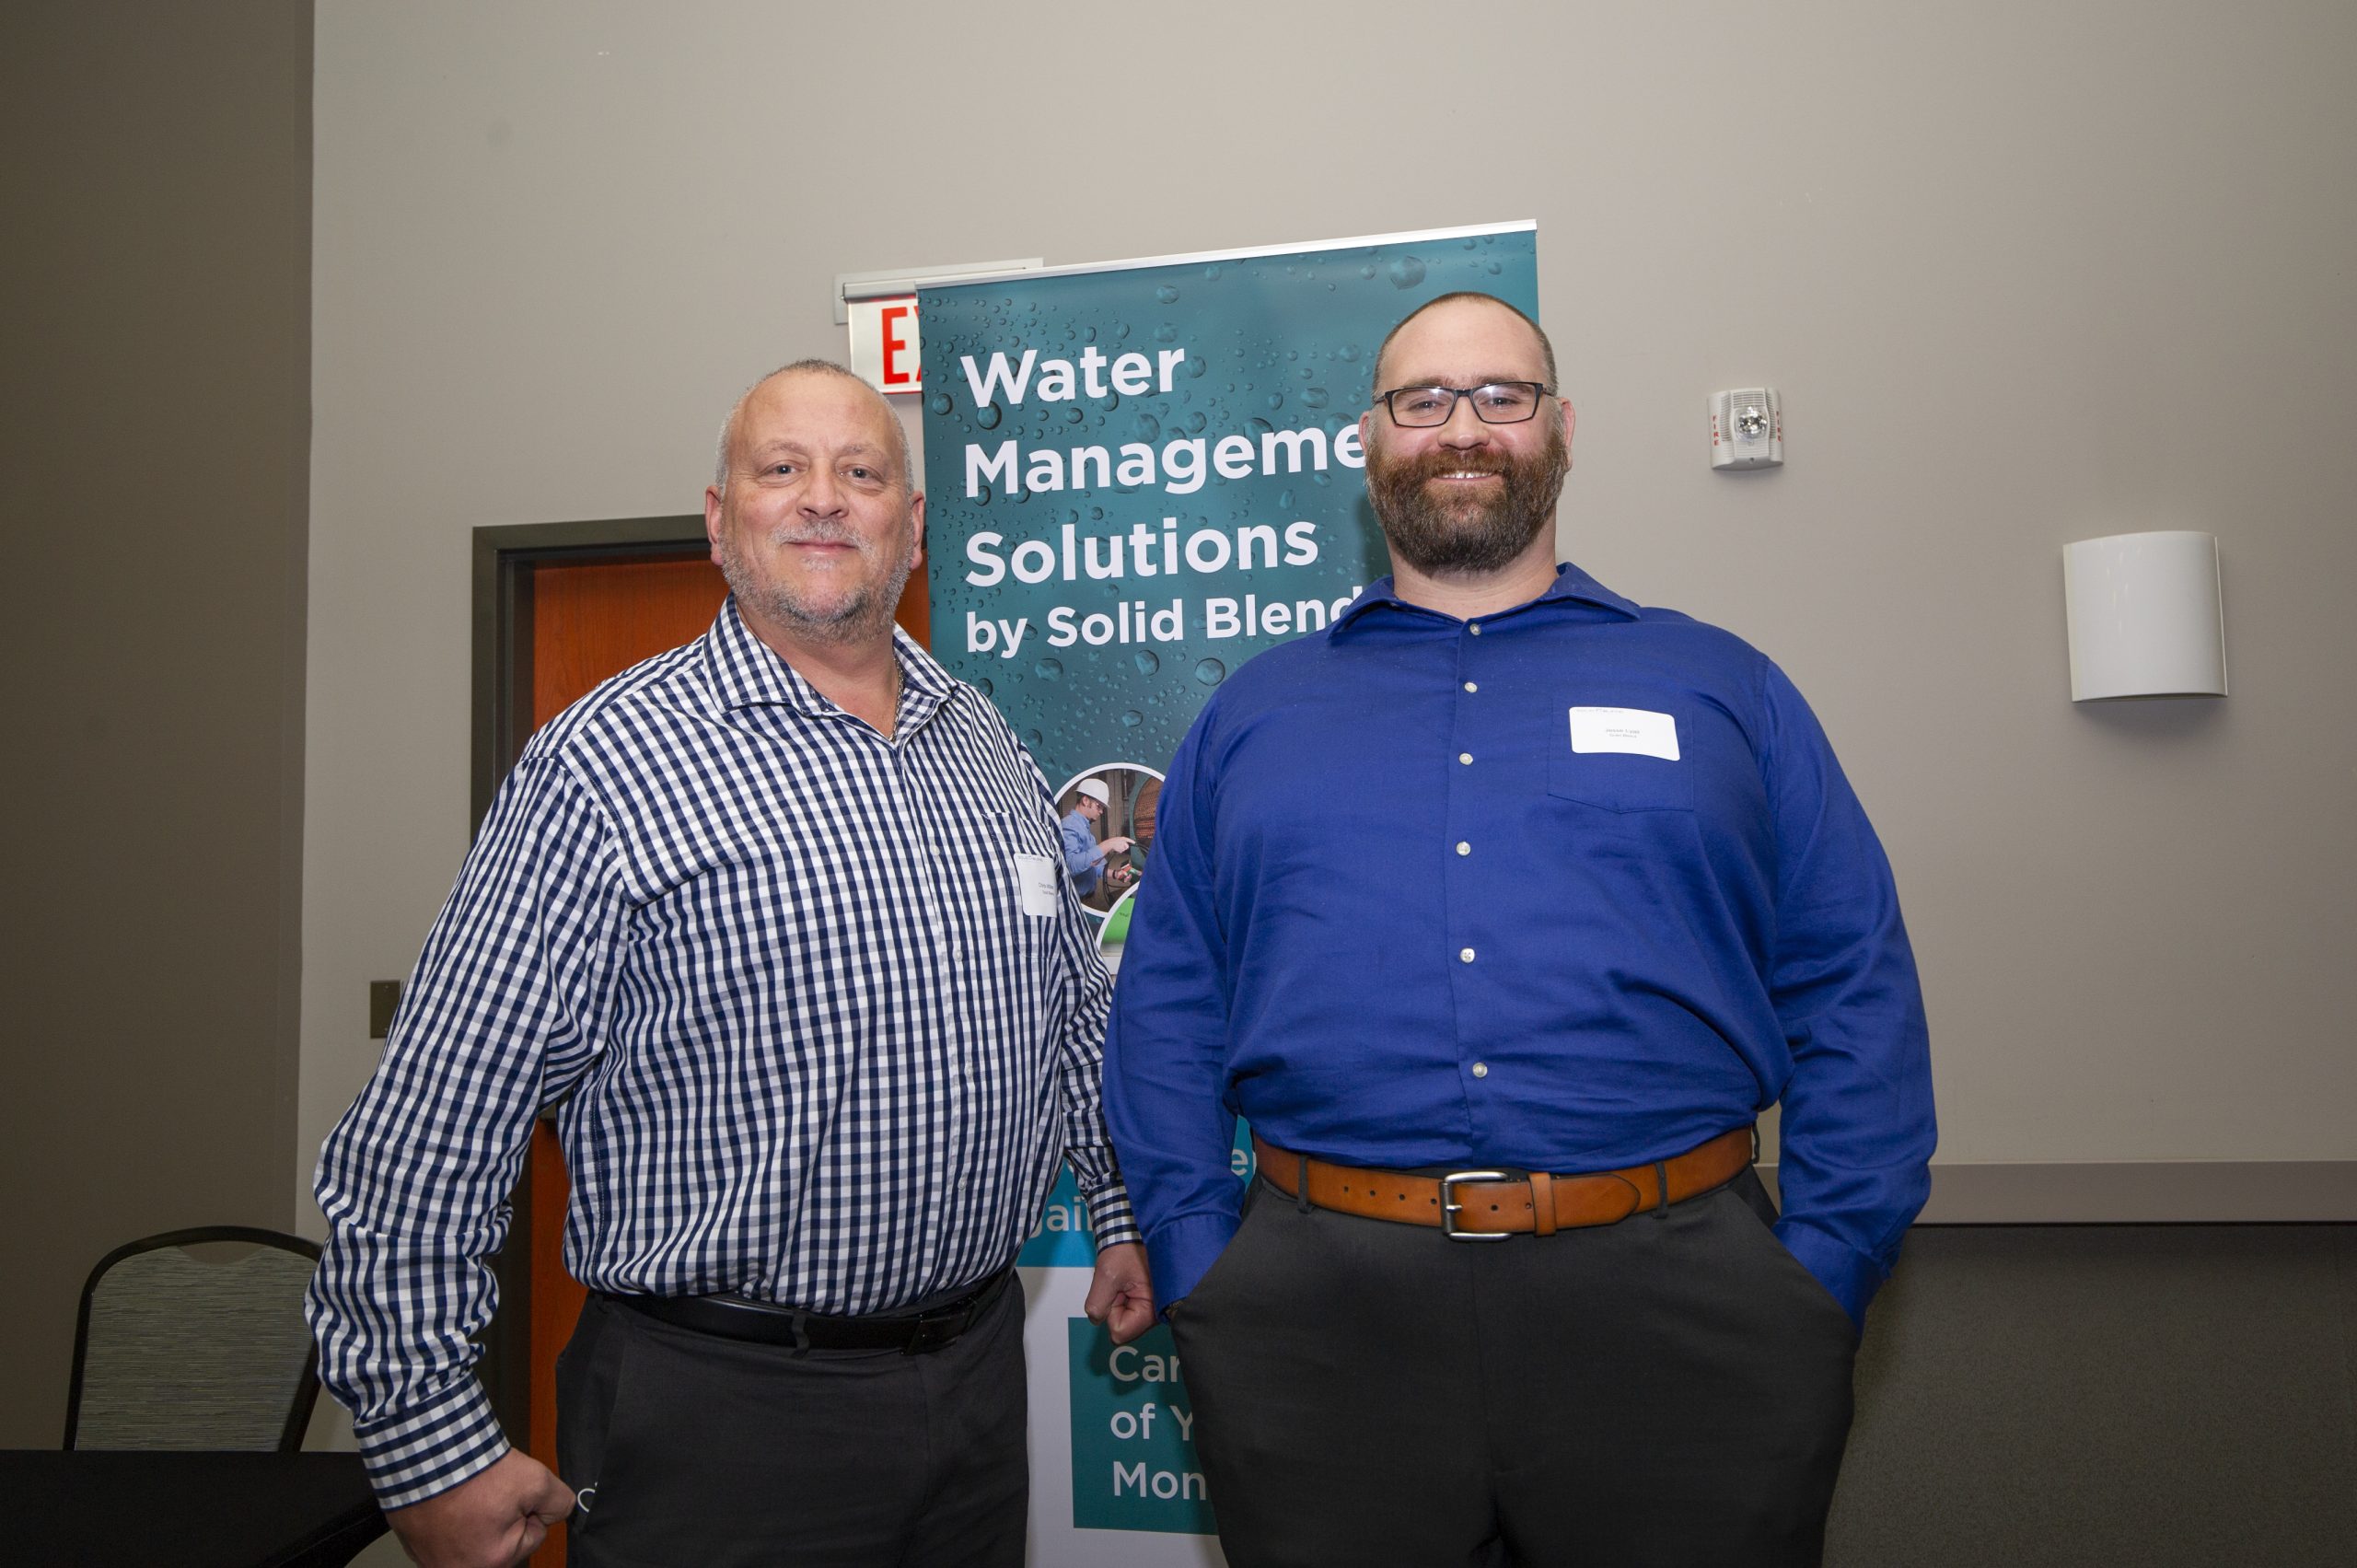 We know what you’re doing on March 23. Water management Summit